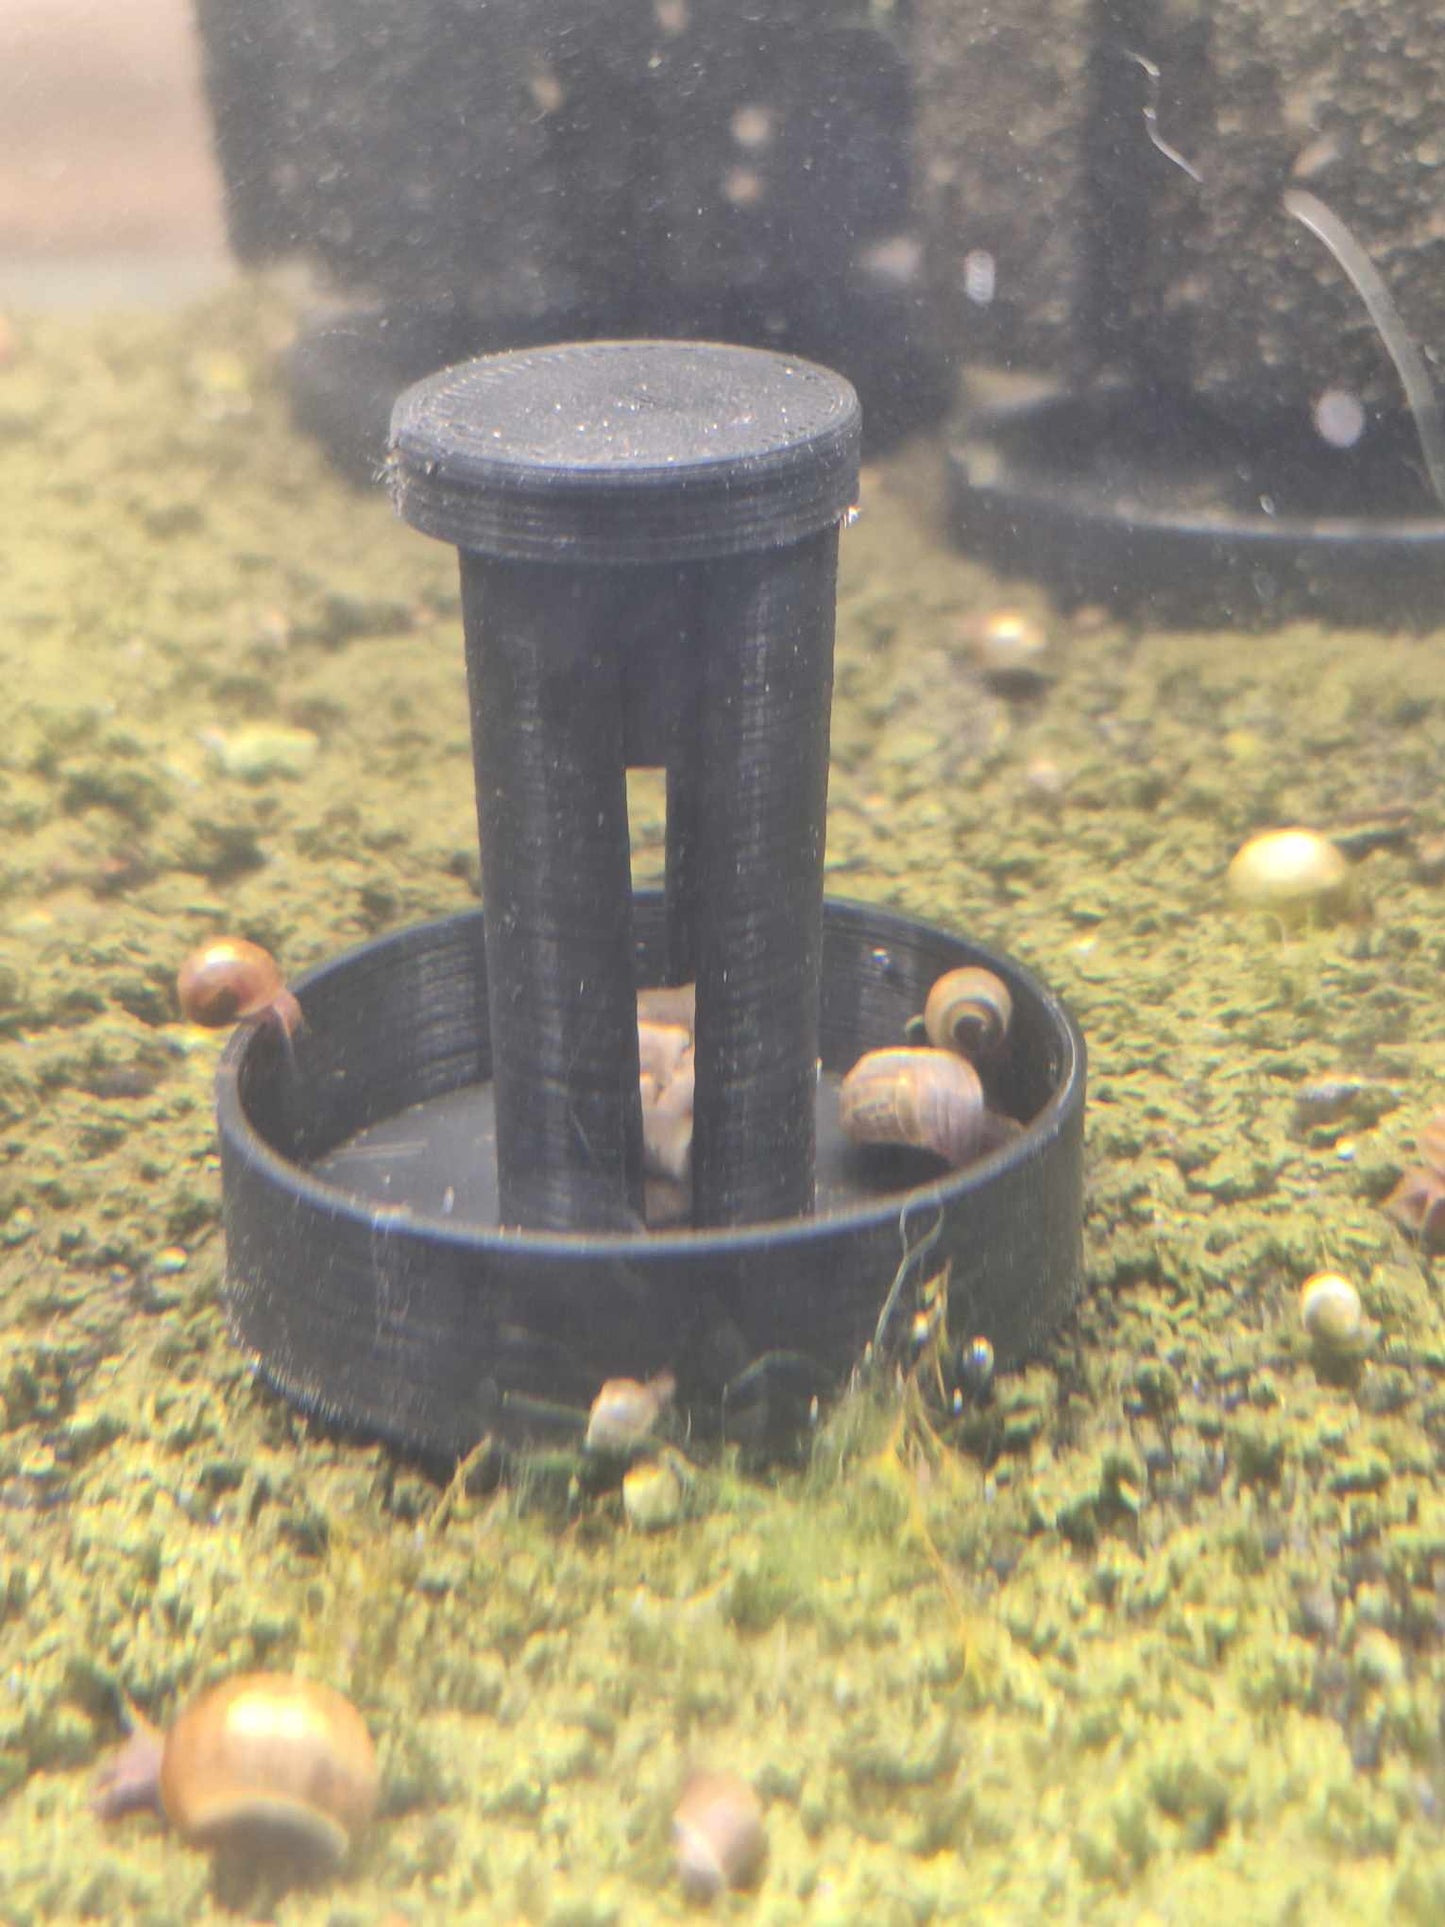 Continuation of the timelapse: Overture black PETG Snail Saver Trap with snail bait inside, as snails approach and explore the trap's interior, set in an aquarium environment with detritus and snail waste.